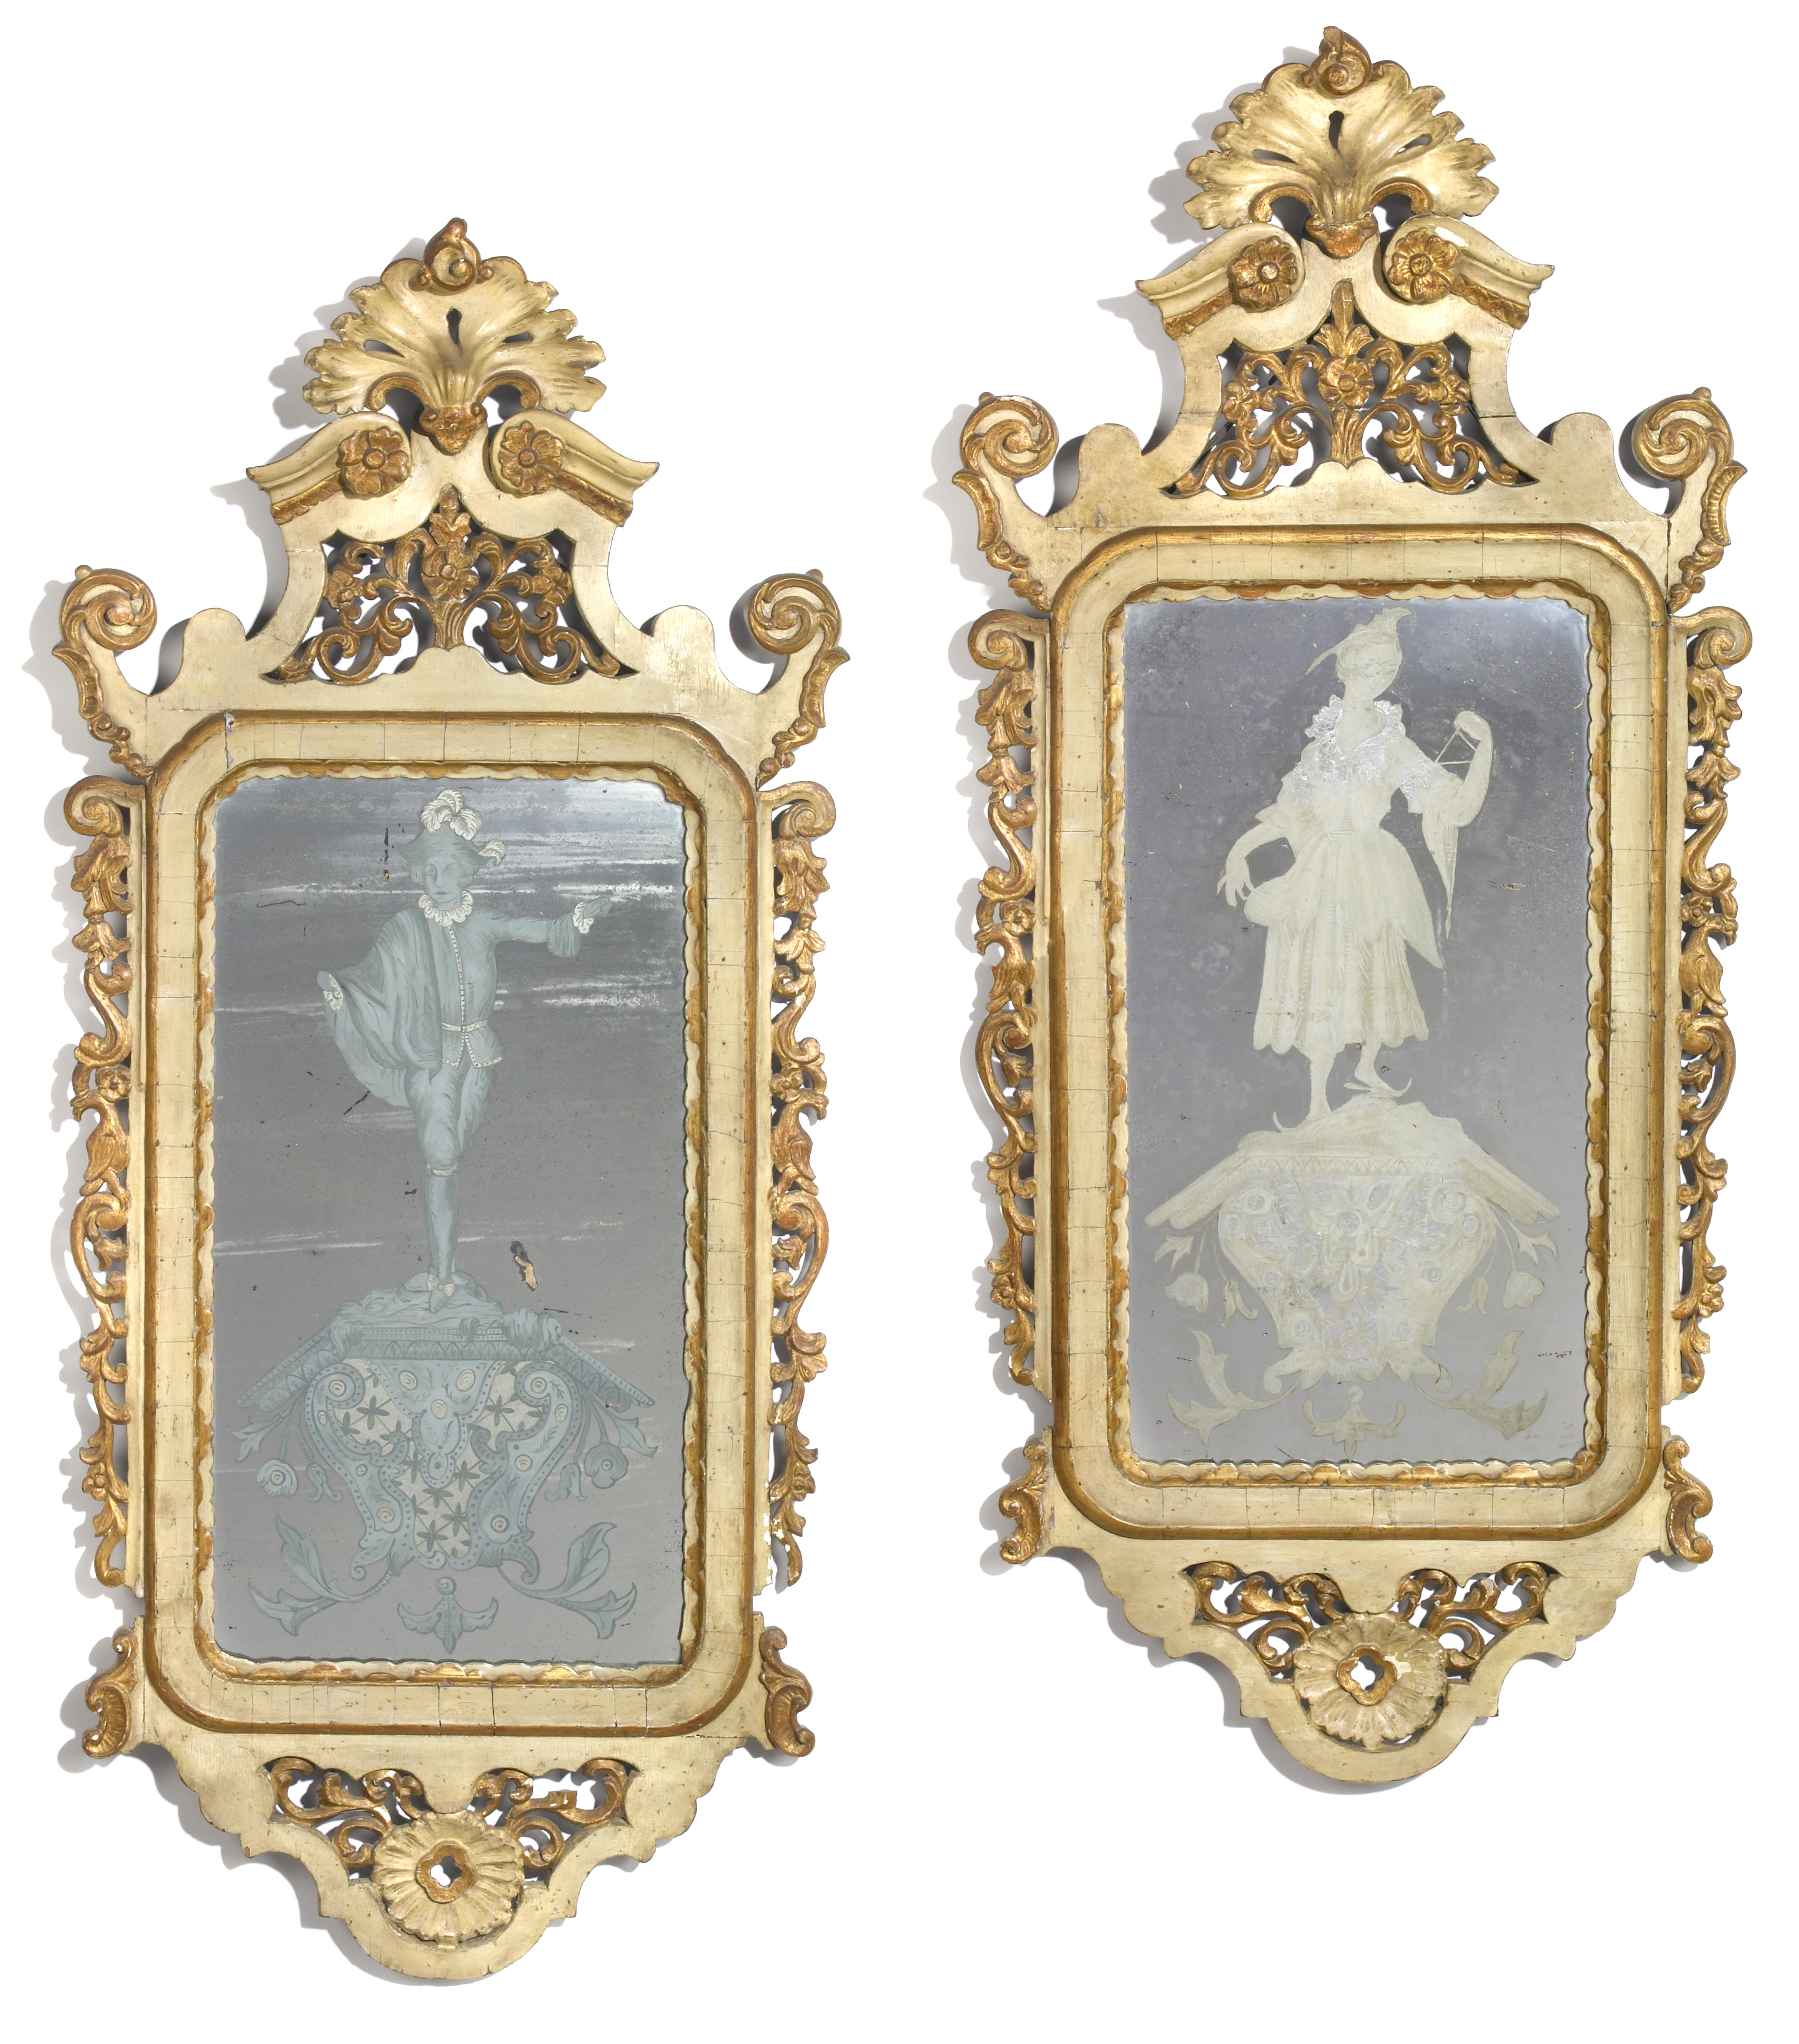 A pair of Italian Rococo style